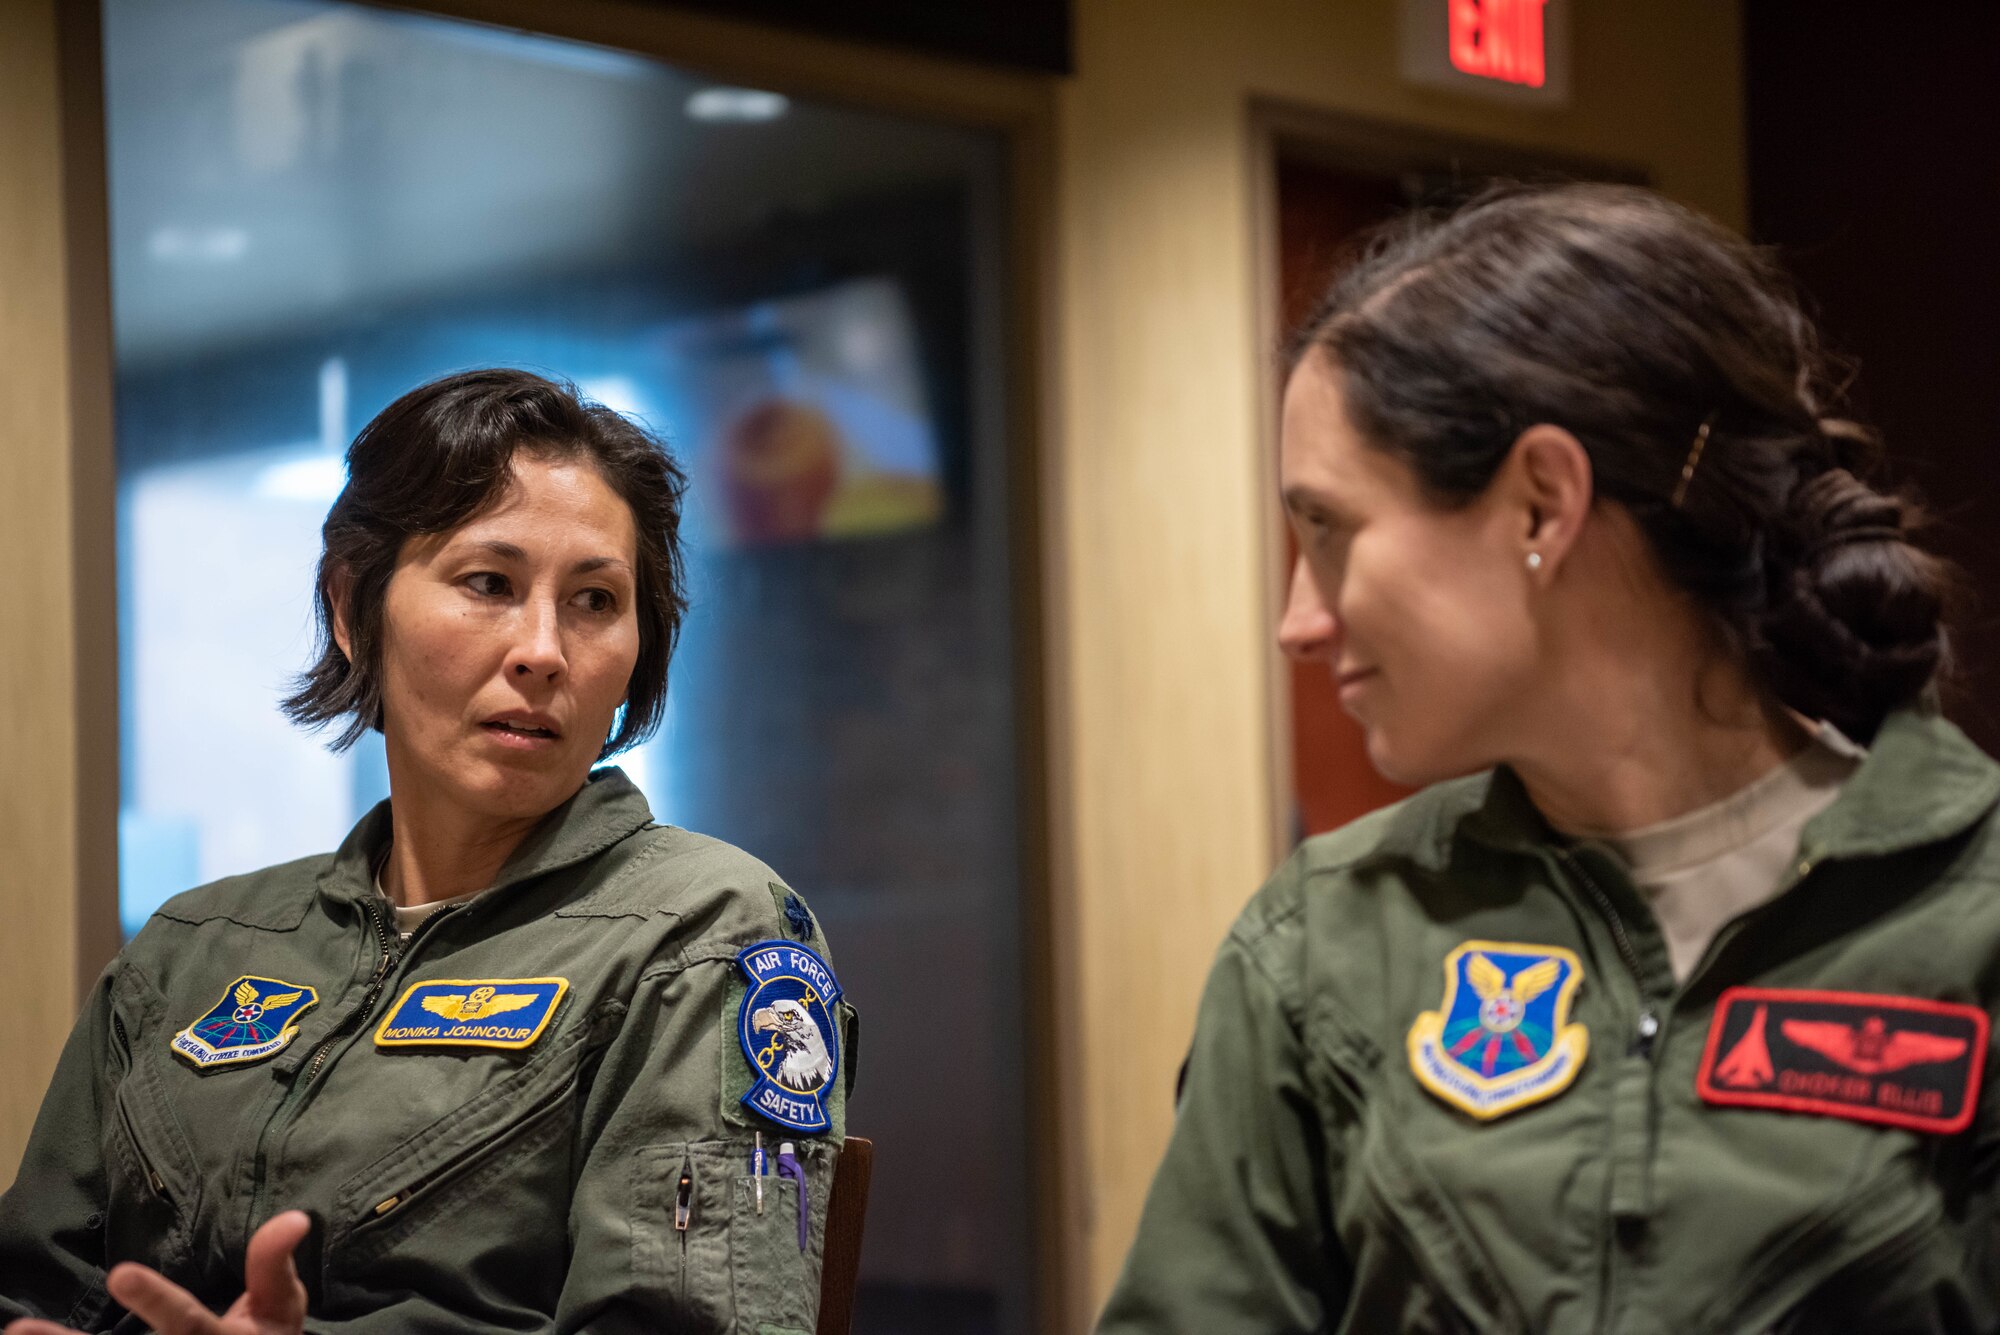 Attendees introduce themselves at the inaugural 28th Bomb Wing Women’s Lean In Circle at the Raider Café conference room on Ellsworth Air Force Base, S.D., March 26, 2019. Both men and women serving on Ellsworth AFB were invited to attend to discuss and break down barriers to success and happiness that are based on gender. (U.S. Air Force photo by Tech. Sgt. Jette Carr)